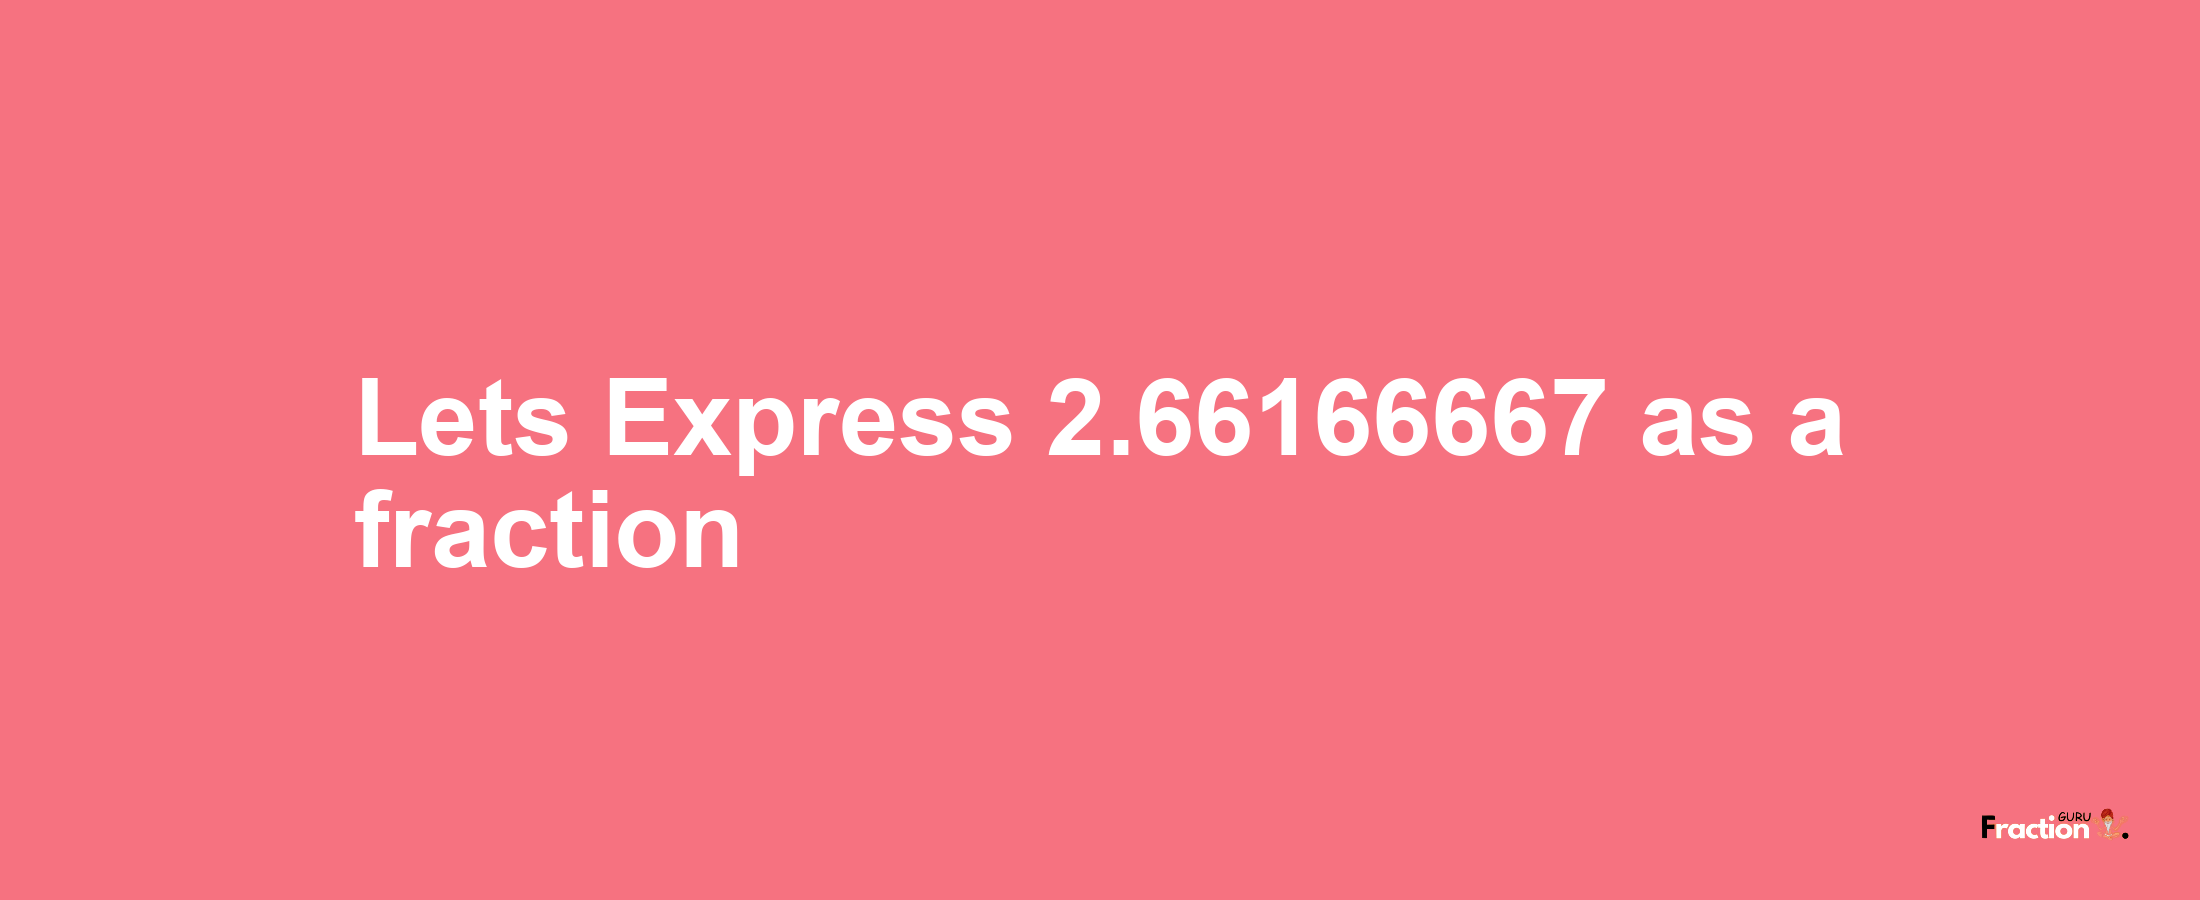 Lets Express 2.66166667 as afraction